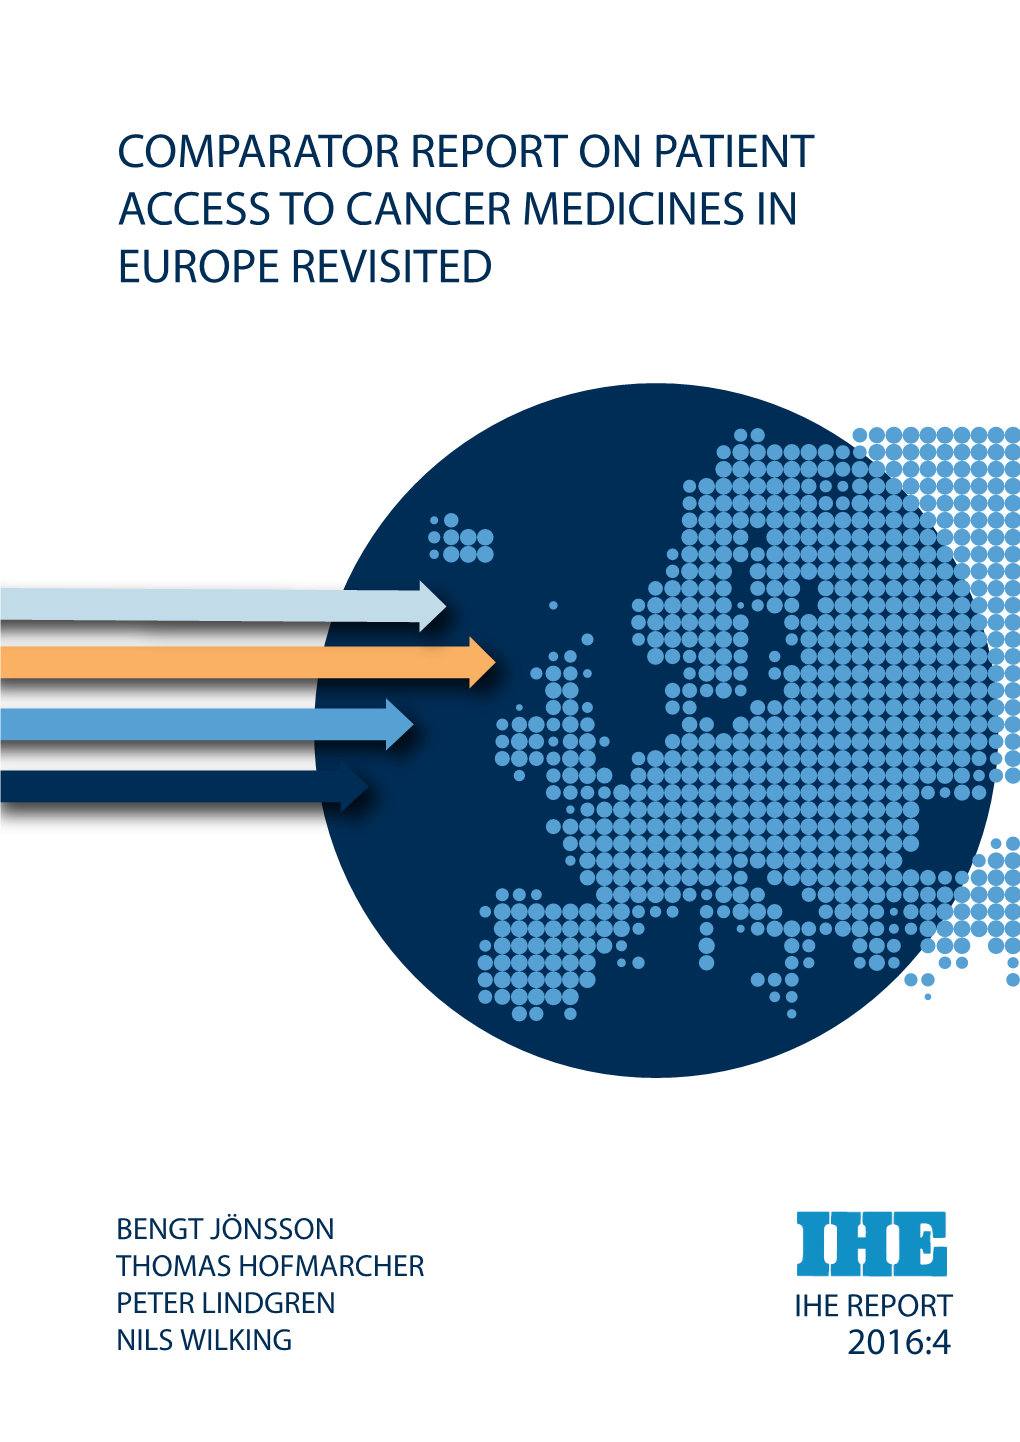 Comparator Report on Patient Access to Cancer Medicines in Europe Revisited